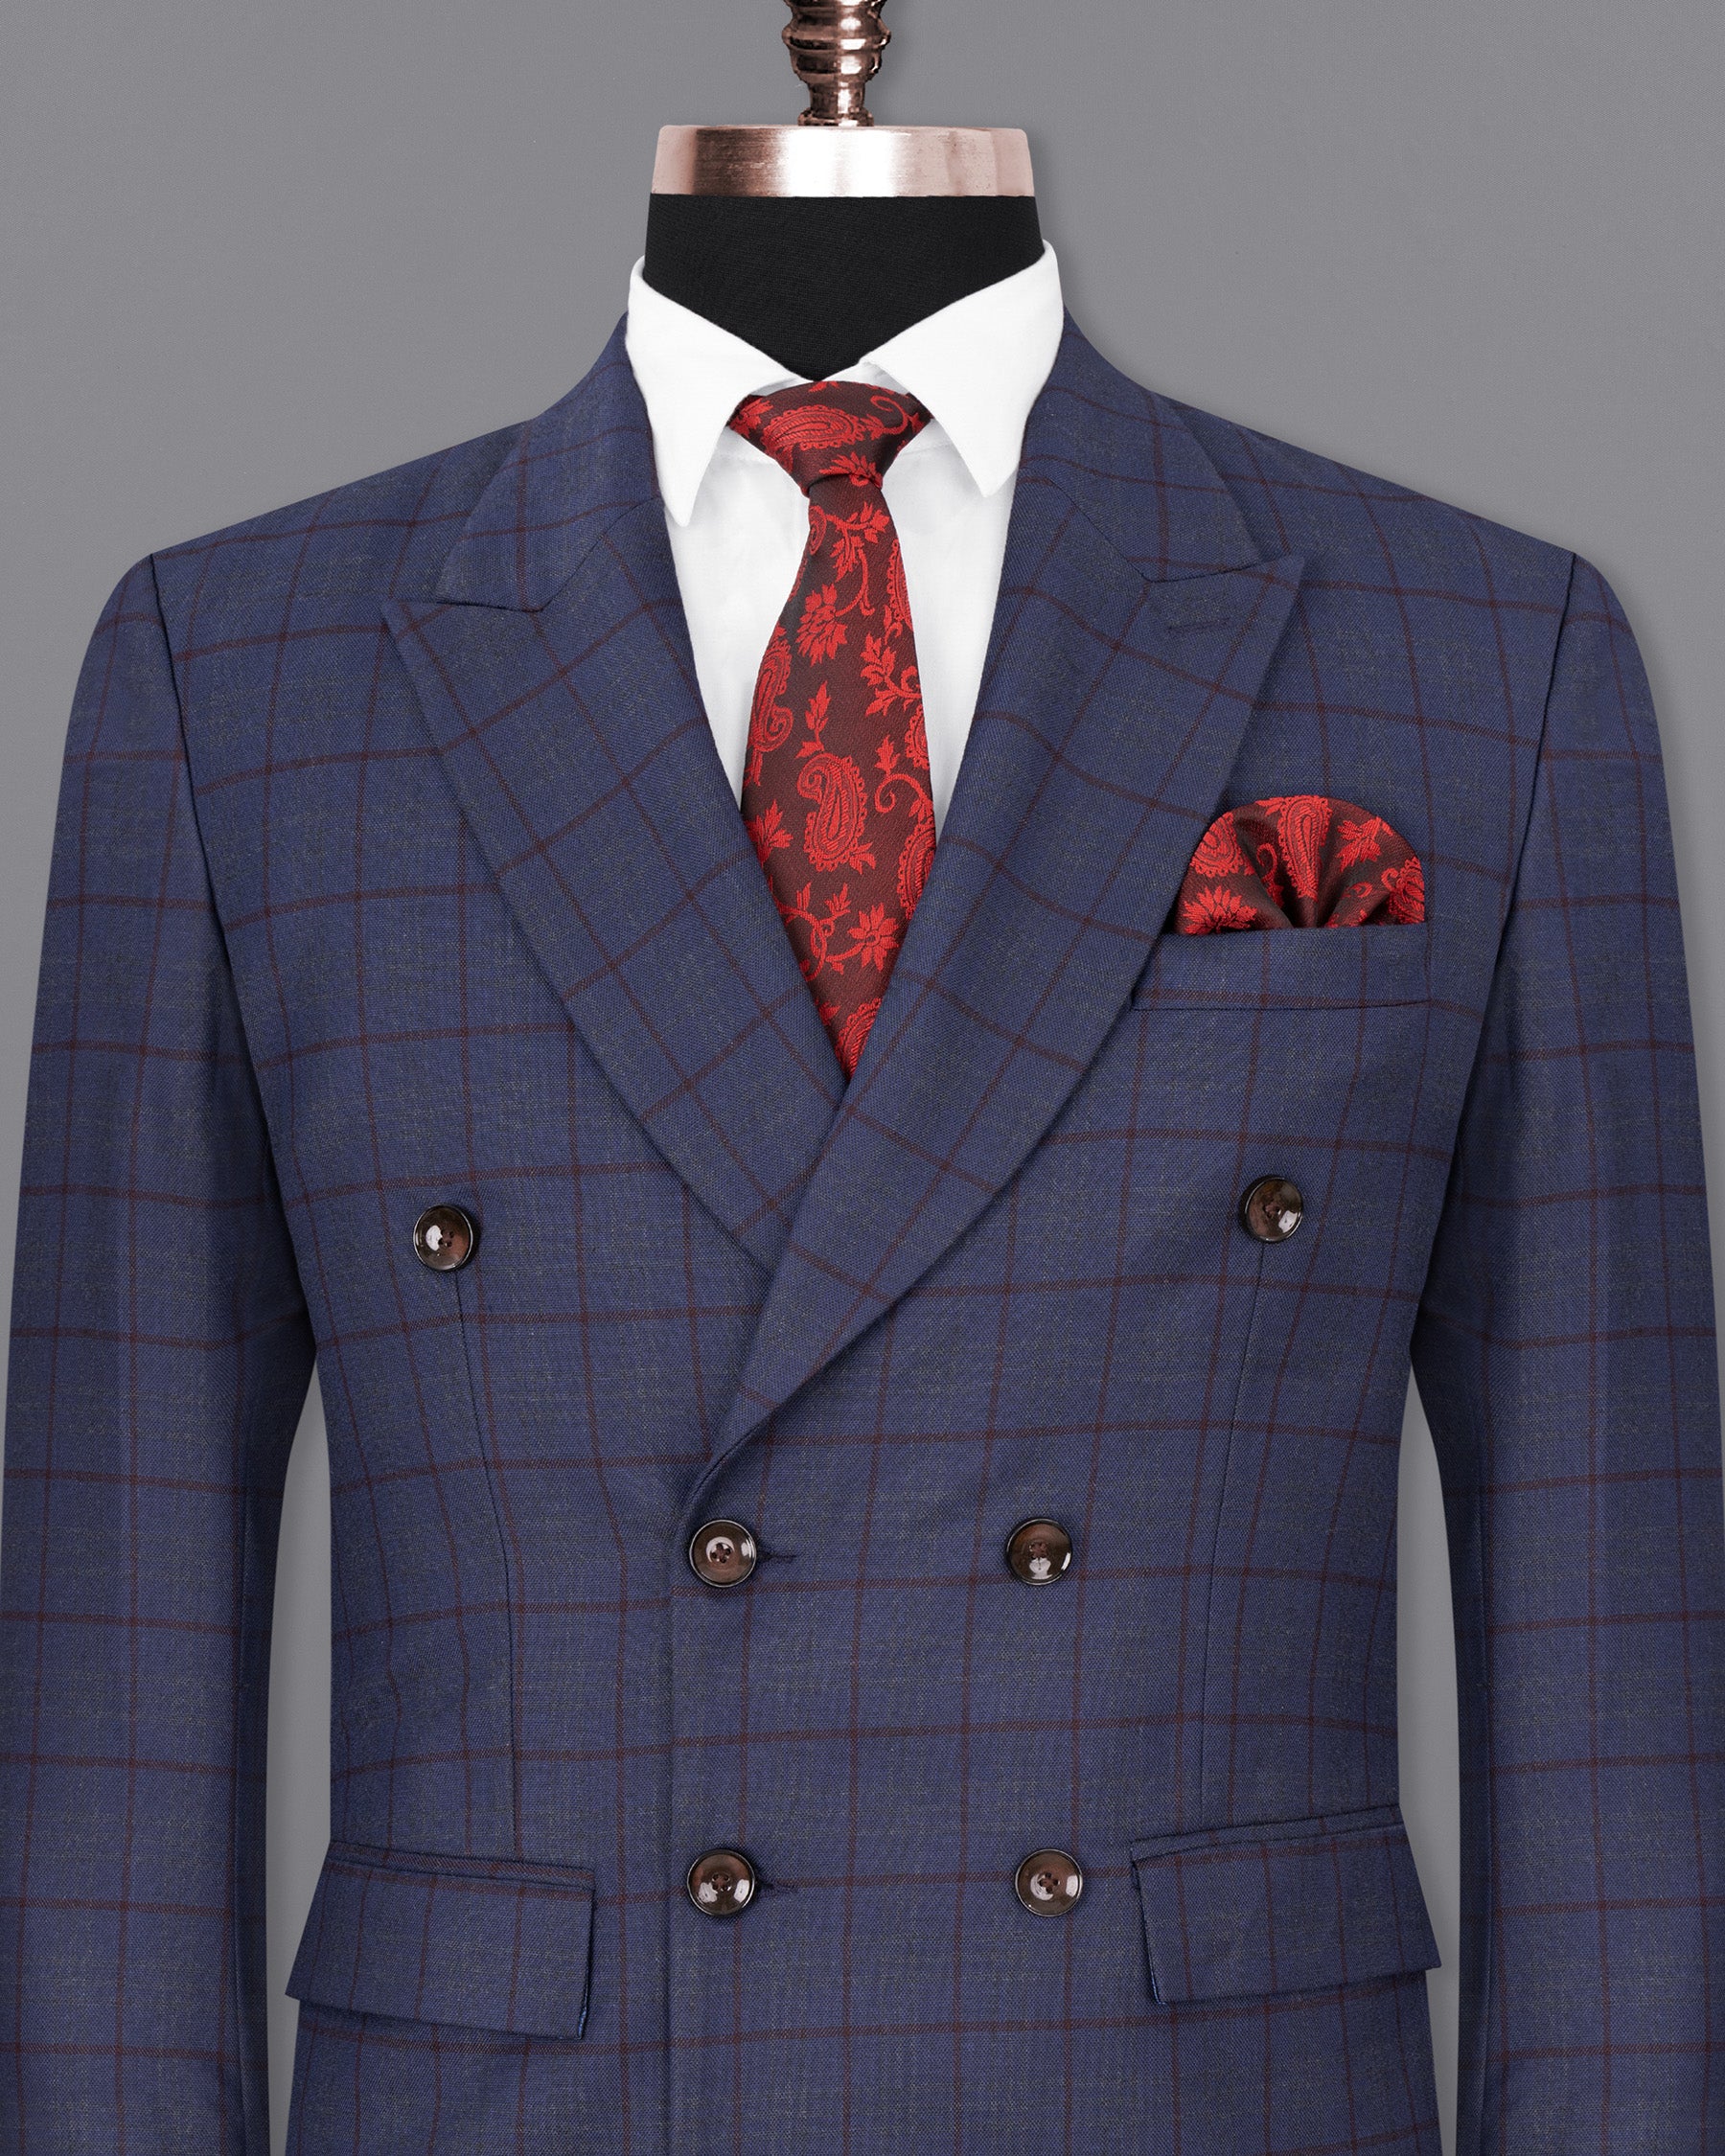 River Bed Blue Windowpane Double Breasted Blazer BL1771-DB-36, BL1771-DB-38, BL1771-DB-40, BL1771-DB-42, BL1771-DB-44, BL1771-DB-46, BL1771-DB-48, BL1771-DB-50, BL1771-DB-52, BL1771-DB-54, BL1771-DB-56, BL1771-DB-58, BL1771-DB-60